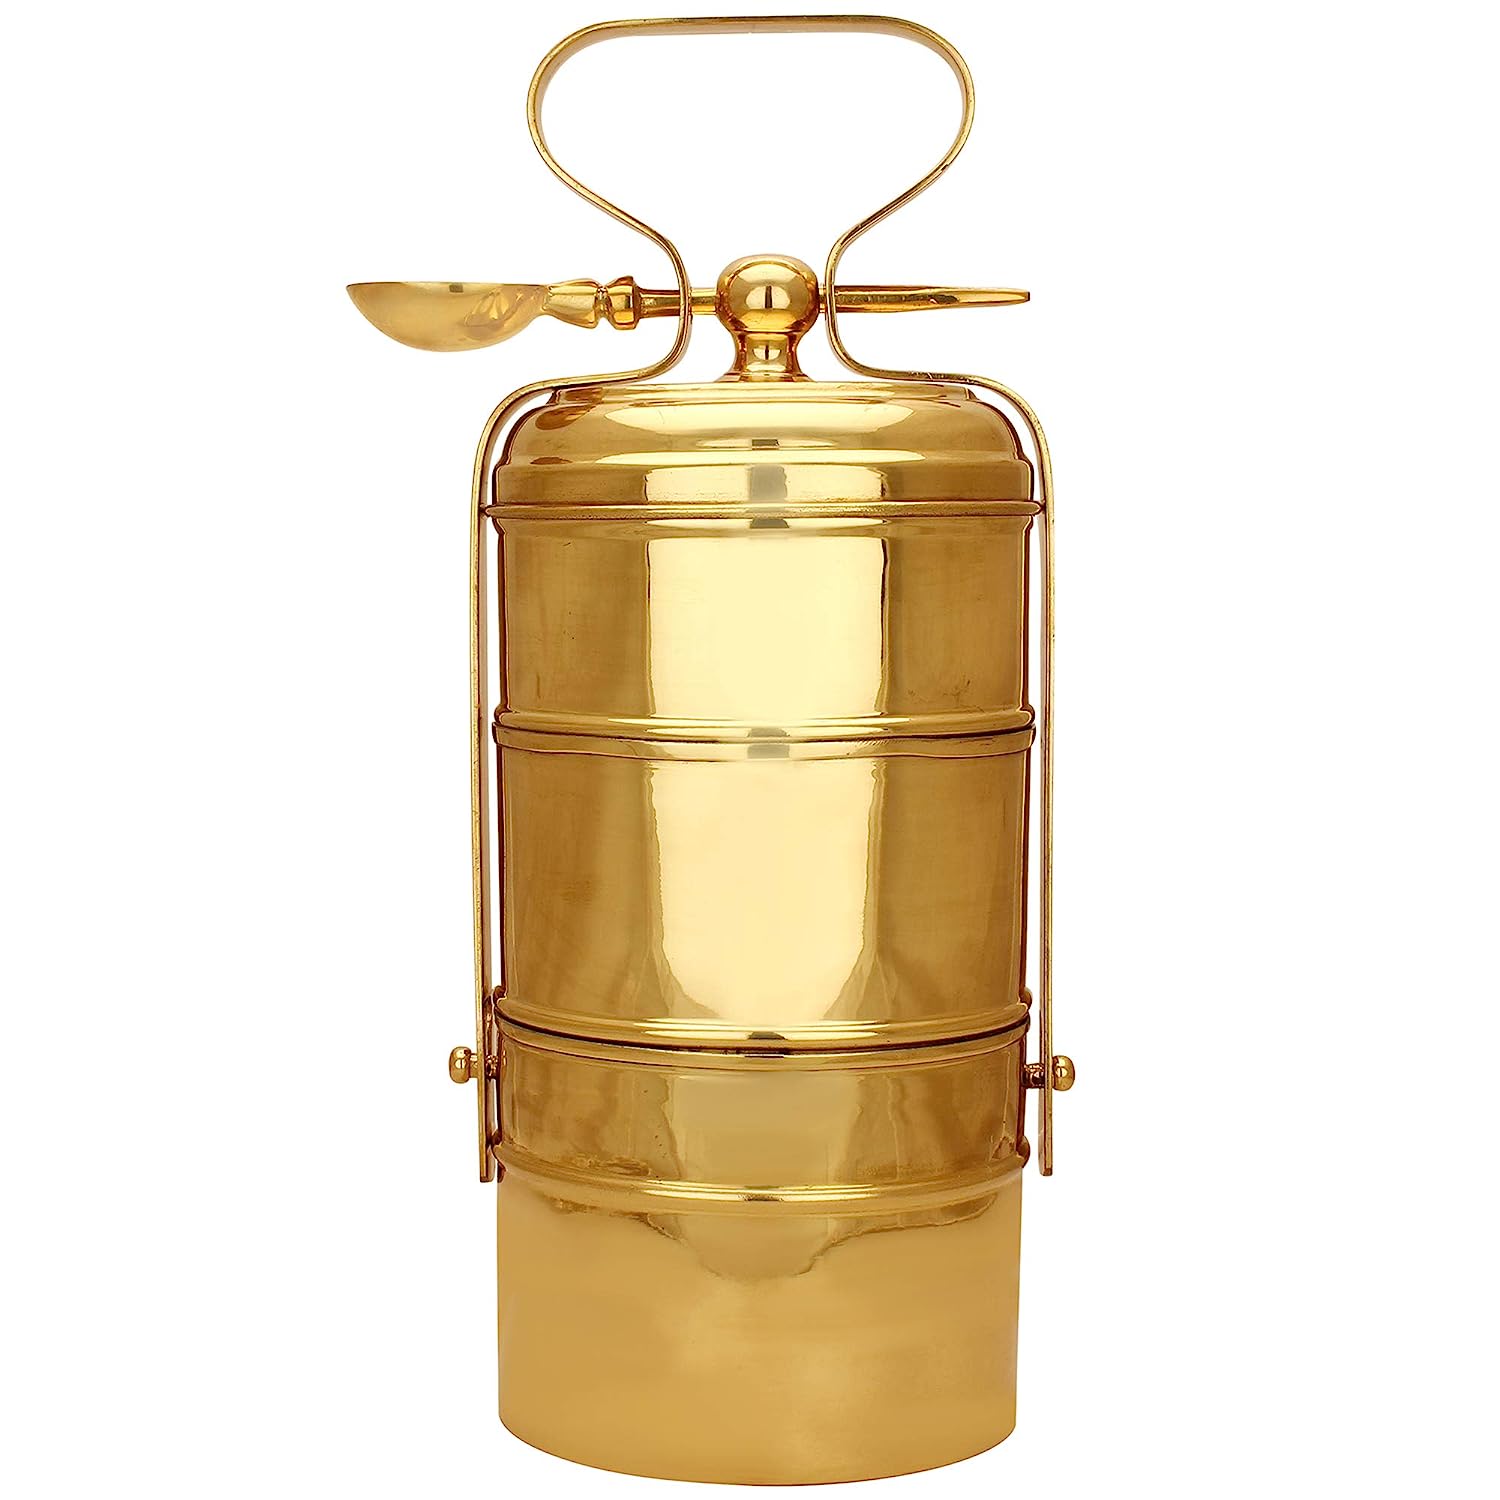 Mannar Craft 3 Tier Export Quality Brass Tiffin Box with Inner Food Grade Tin Lining and Spoon (Gold Silver, Weight 1600 GMS, H 13.5\\